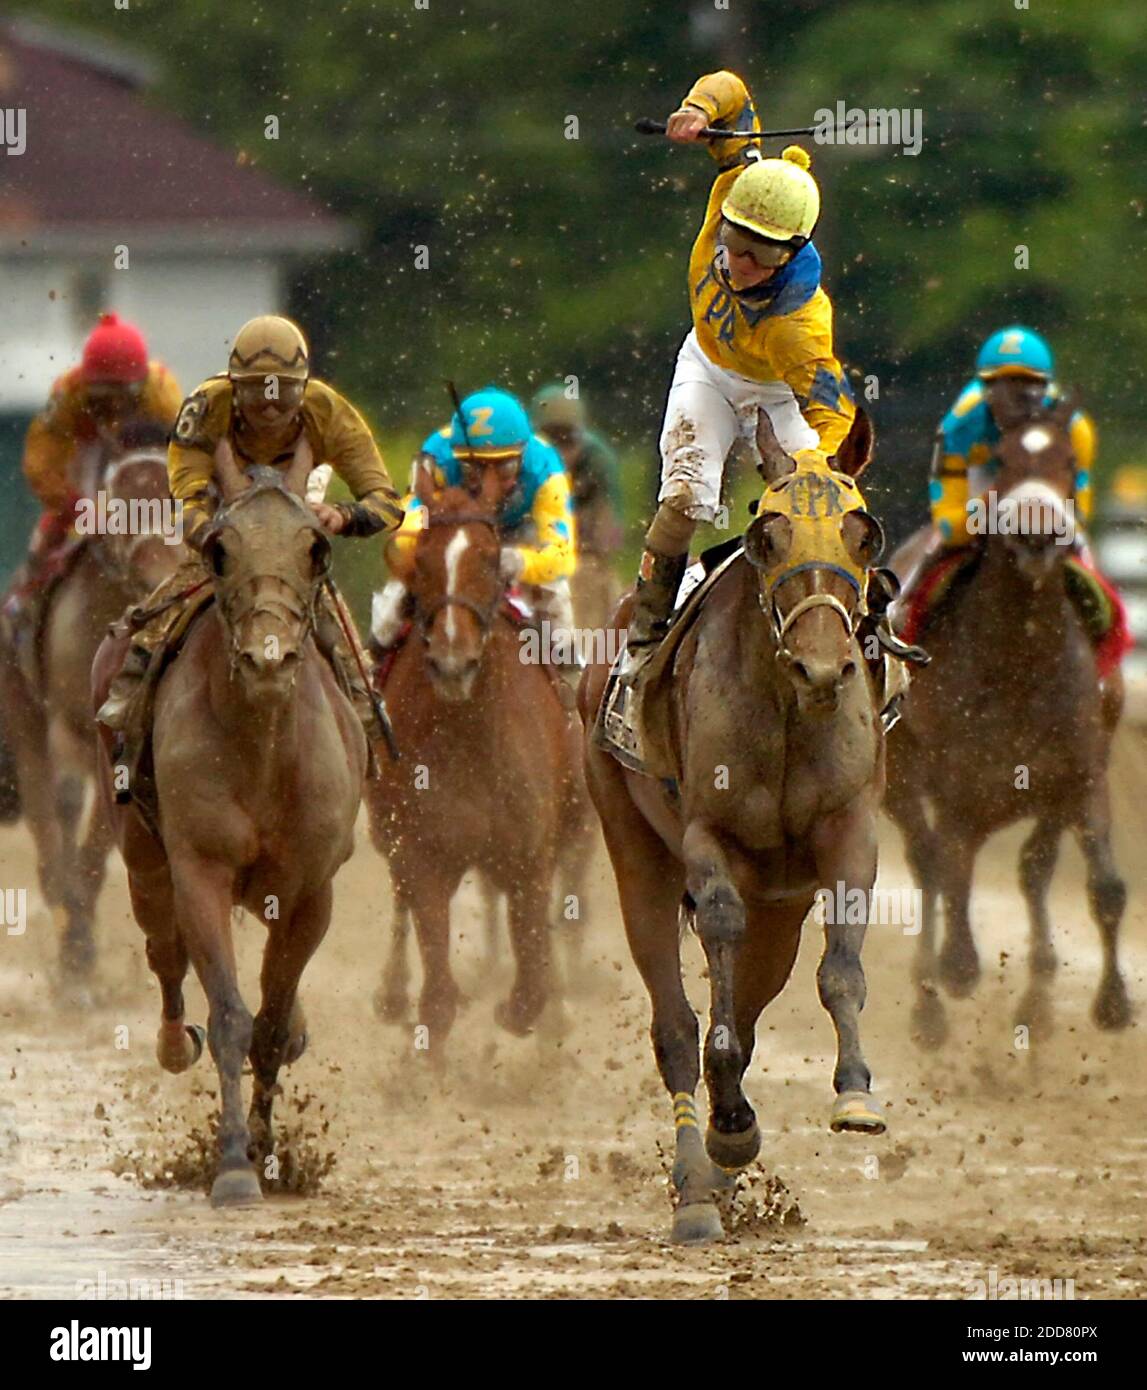 Sweet Vendetta pulled ahead to win the Black-Eyed Susan race at Pimlico Race Track in Baltimore, MD, USA on May 16, 2008. Photo by Monica Lopossay/Baltimore Sun/MCT/Cameleon/ABACAPRESS.COM Stock Photo